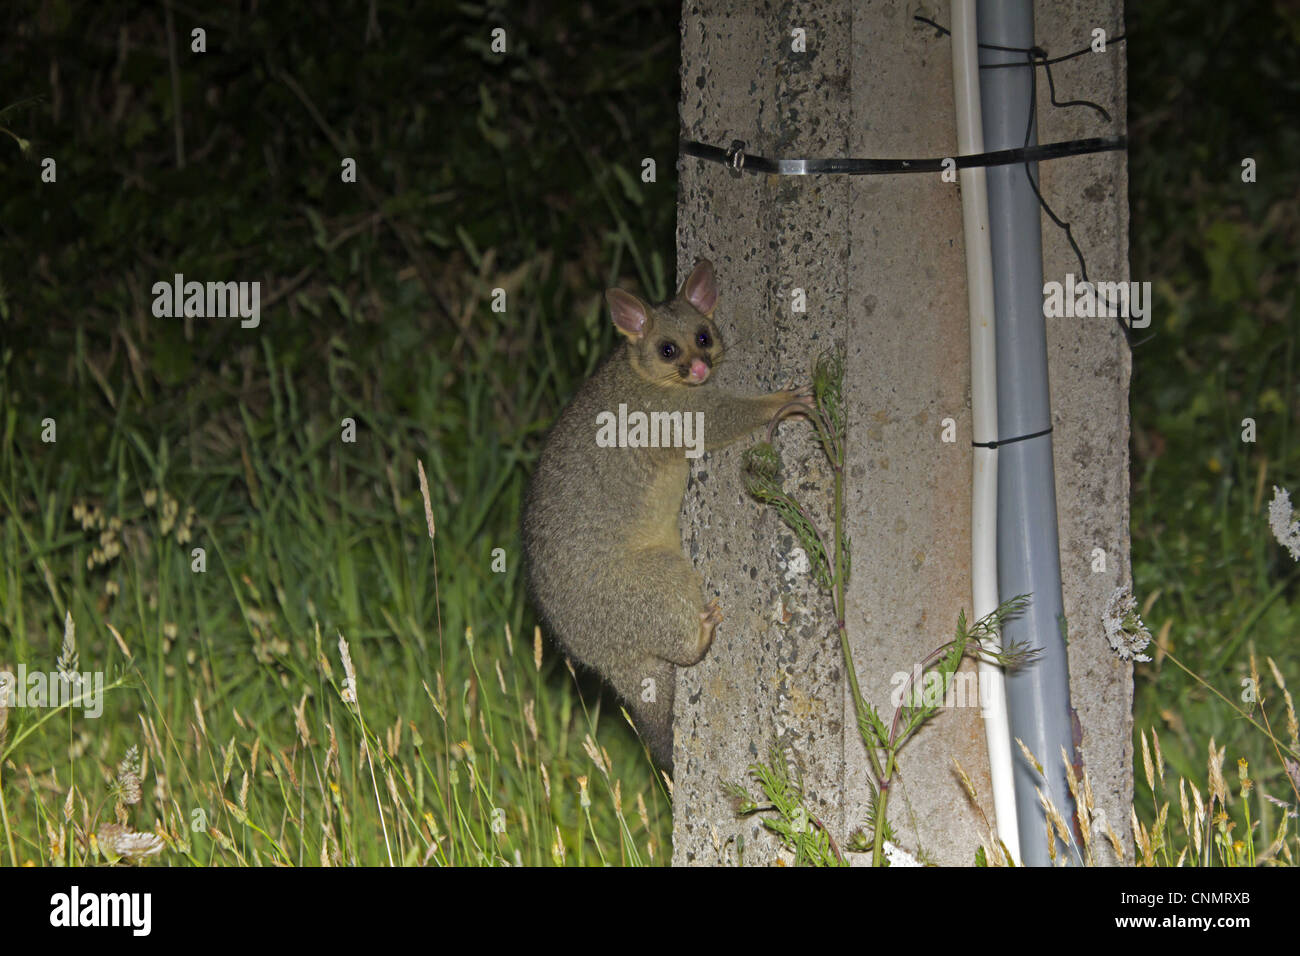 Common Brushtail Possum Trichosurus vulpecula introduced species adult clinging to telegraph pole at night New Zealand november Stock Photo